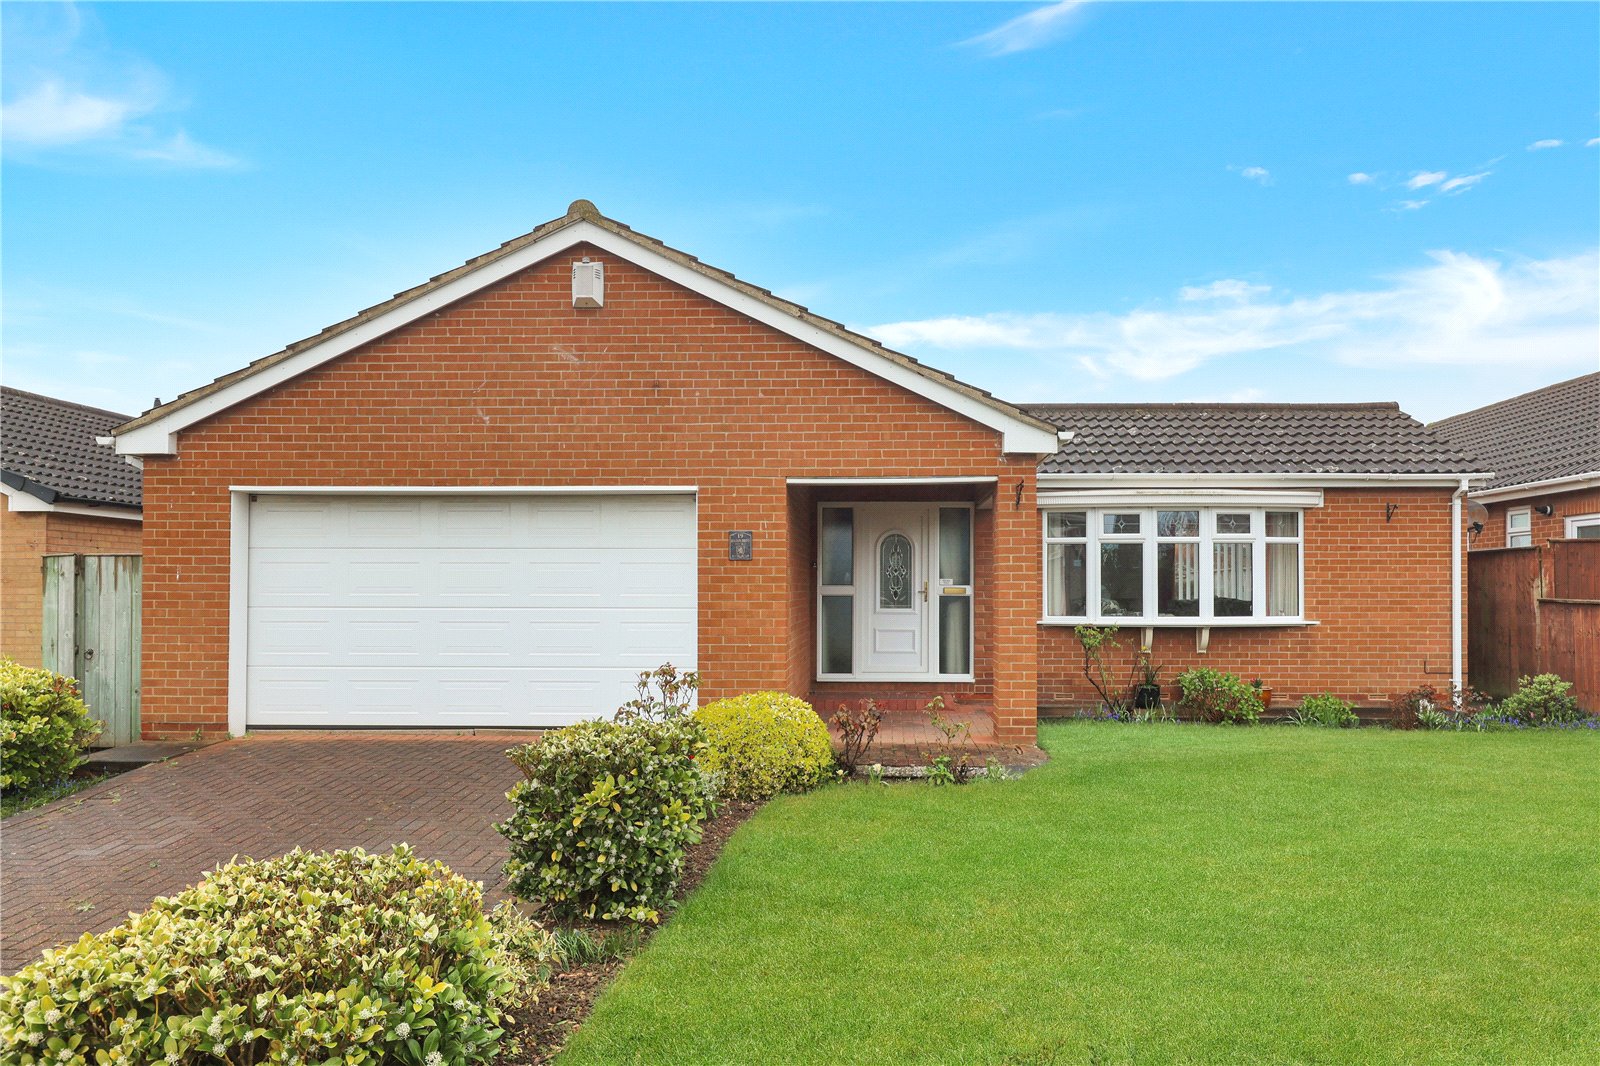 3 bed bungalow for sale in Boston Drive, Marton - Property Image 1